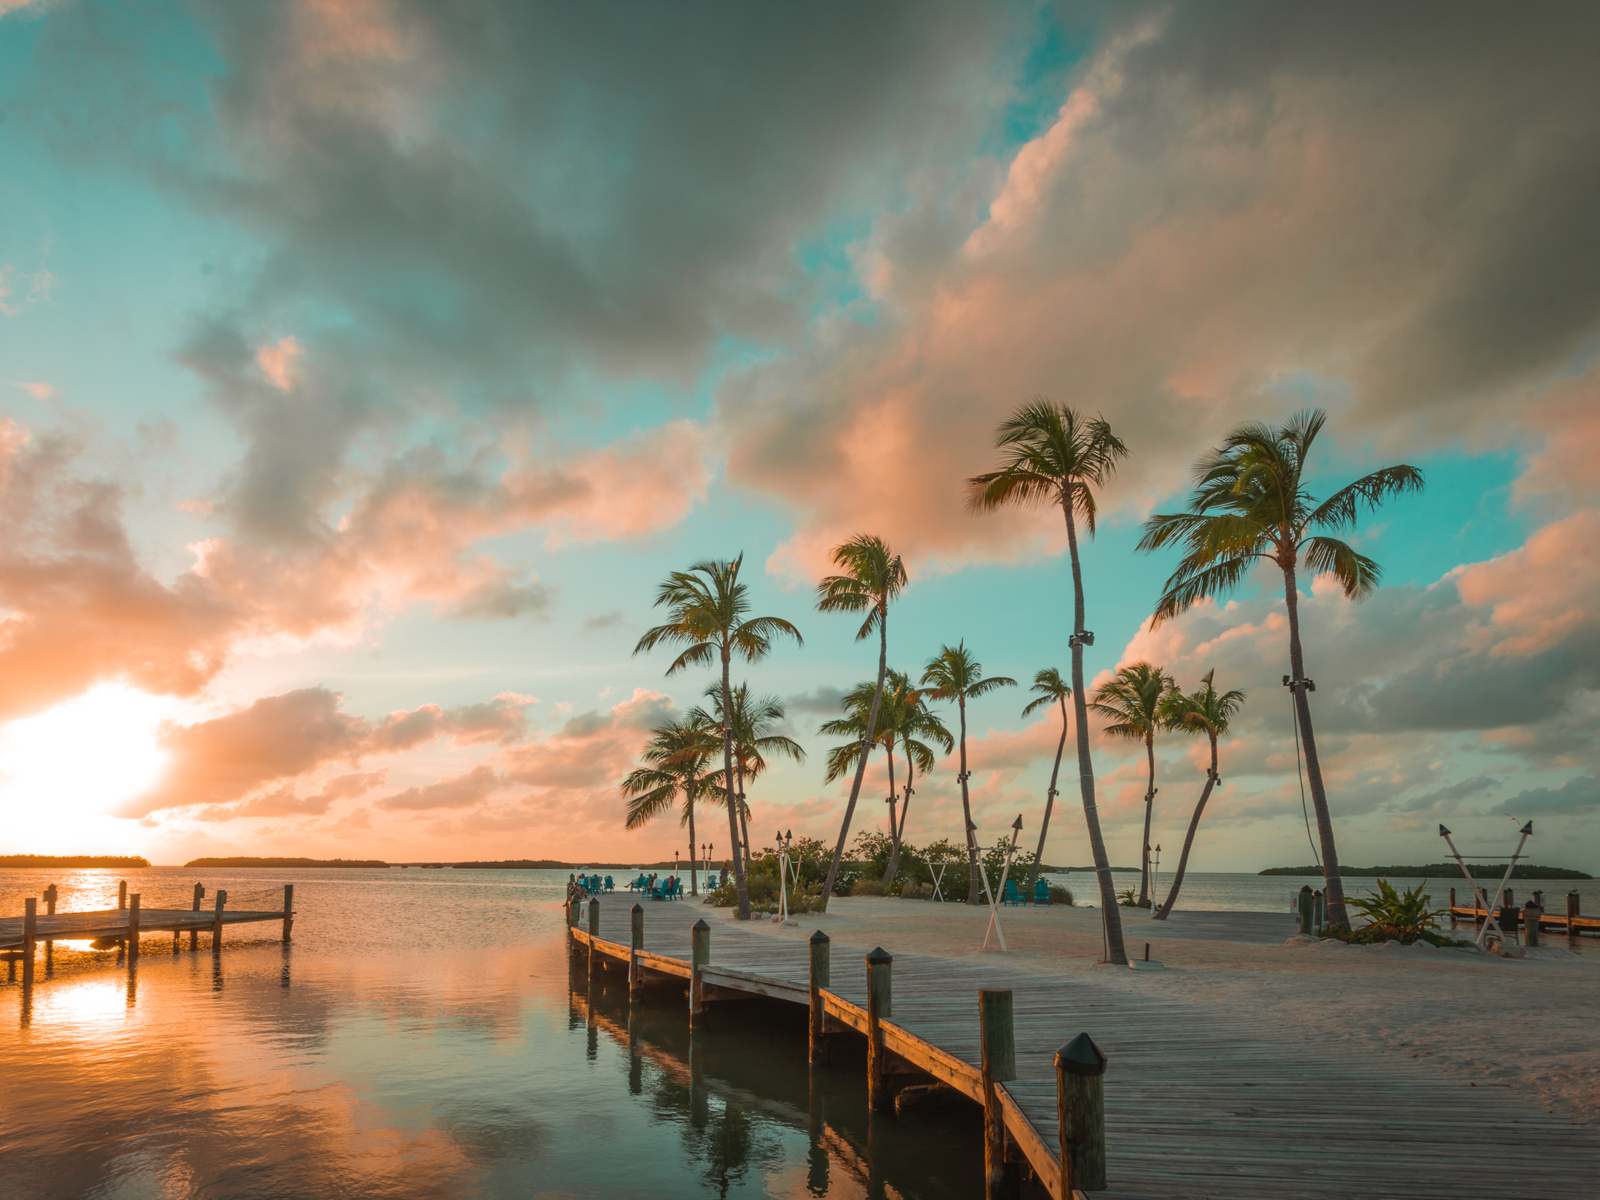 Gorgeous sunset shot of the Keys, one of the best places to visit in Florida